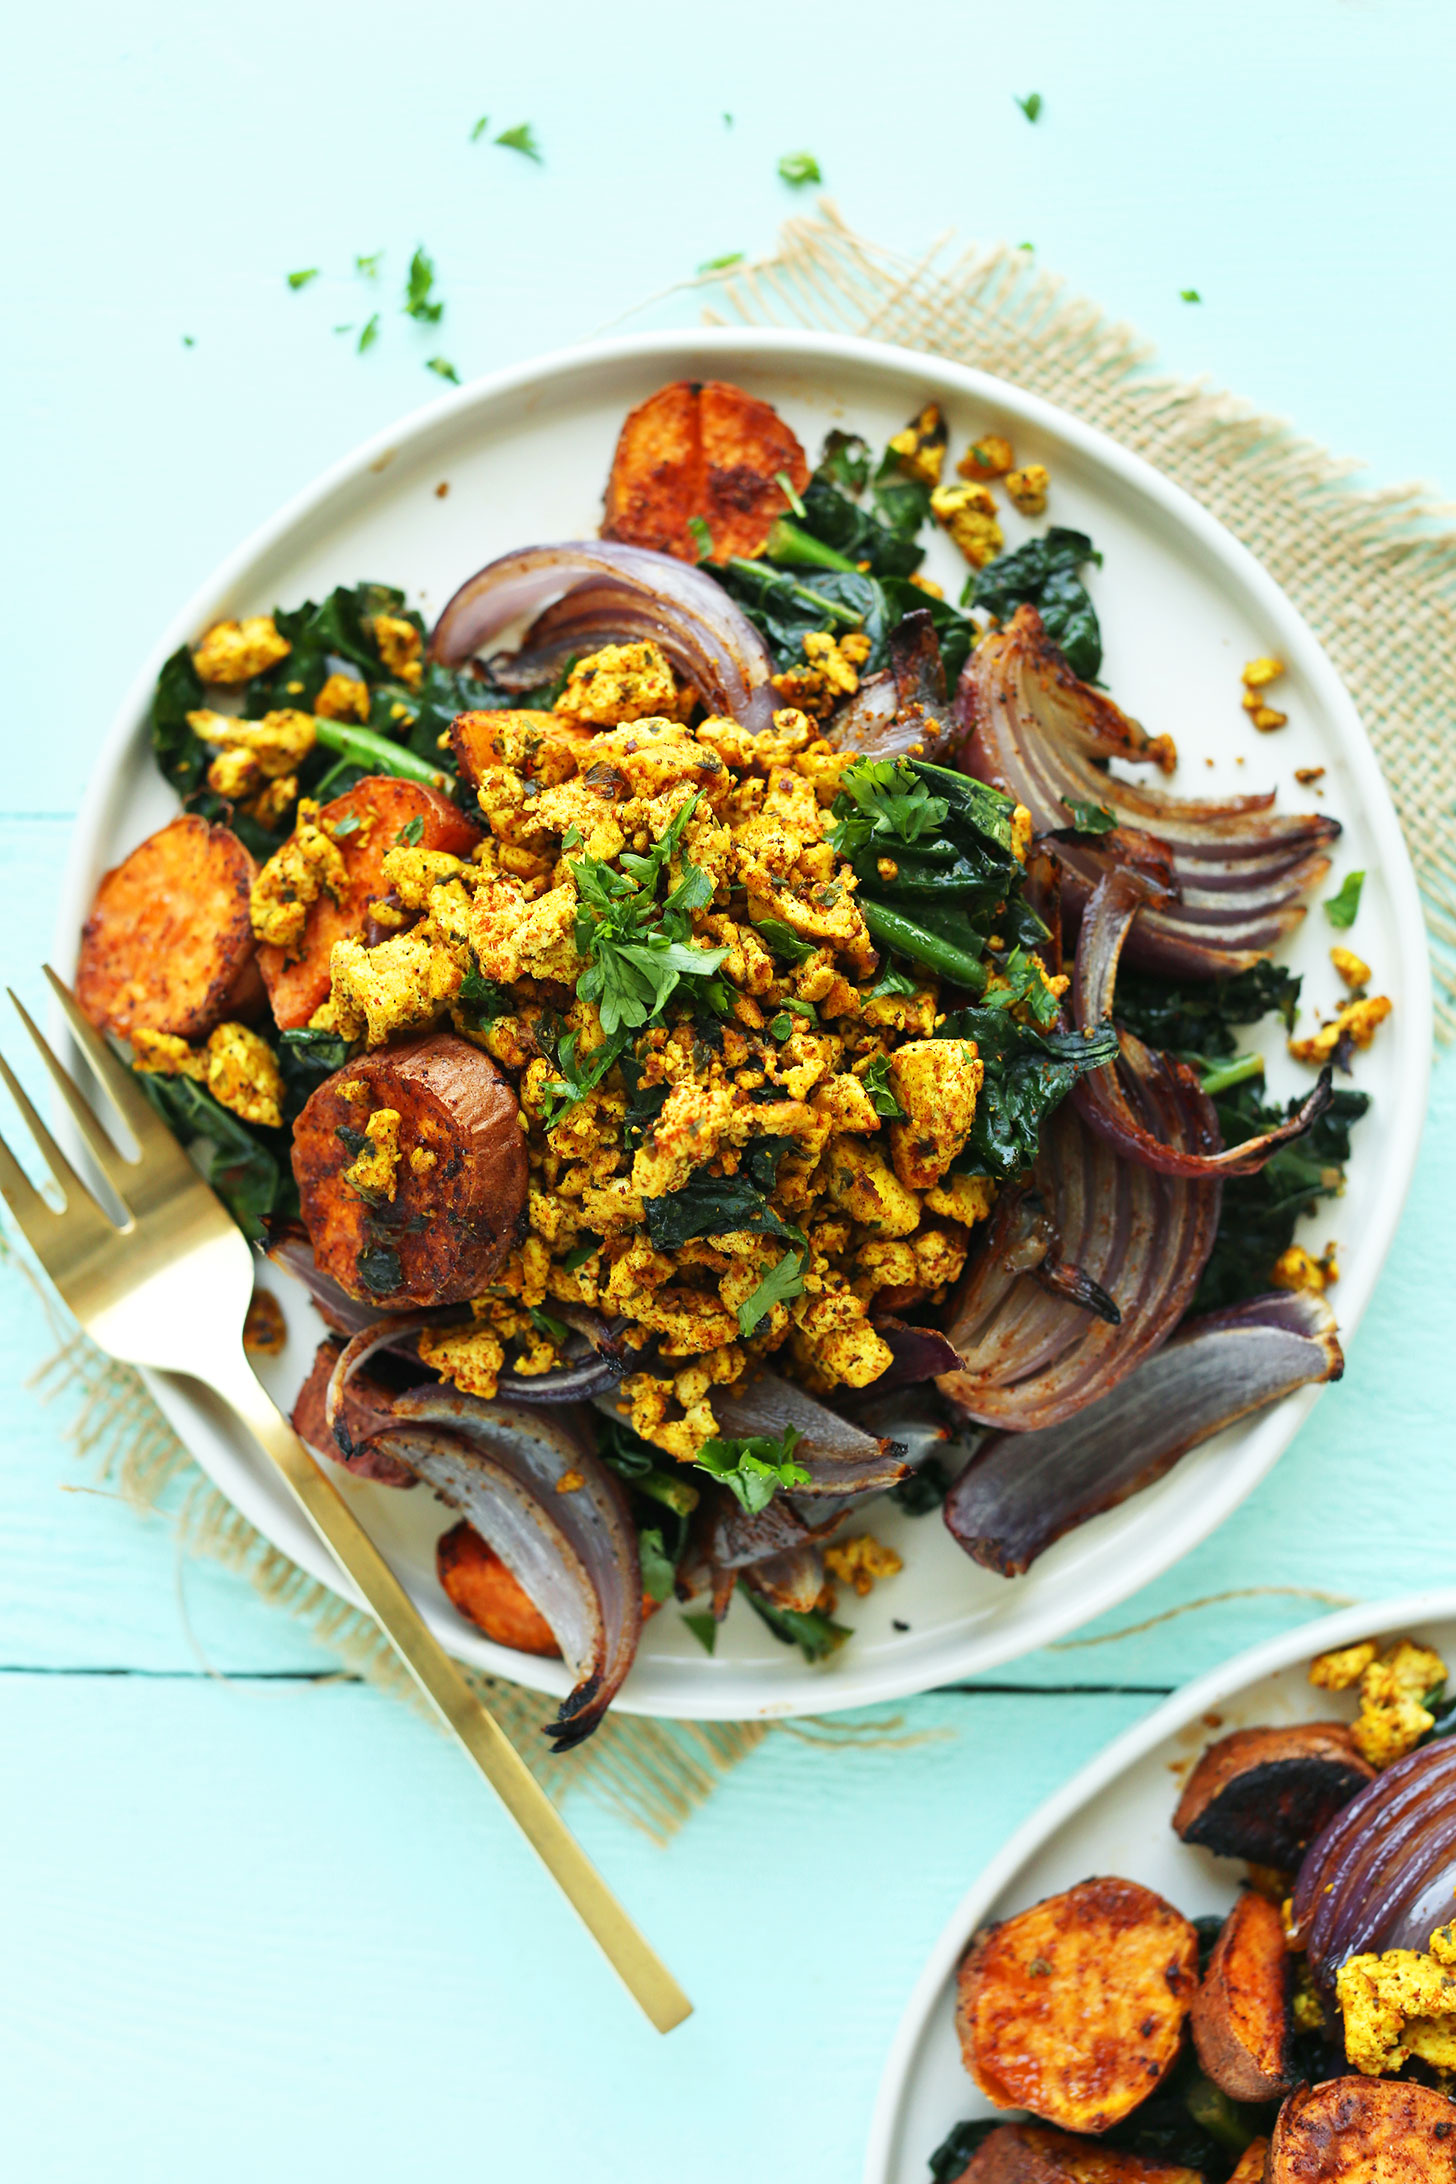 AMAZING Savory Tofu Scramble with Kale Sweet Potatoes and Roasted Red Onion Flavorful plant based and SO satisfying vegan glutenfree tofuscramble breakfast recipe 1 - ROASTED SWEET POTATO KALE